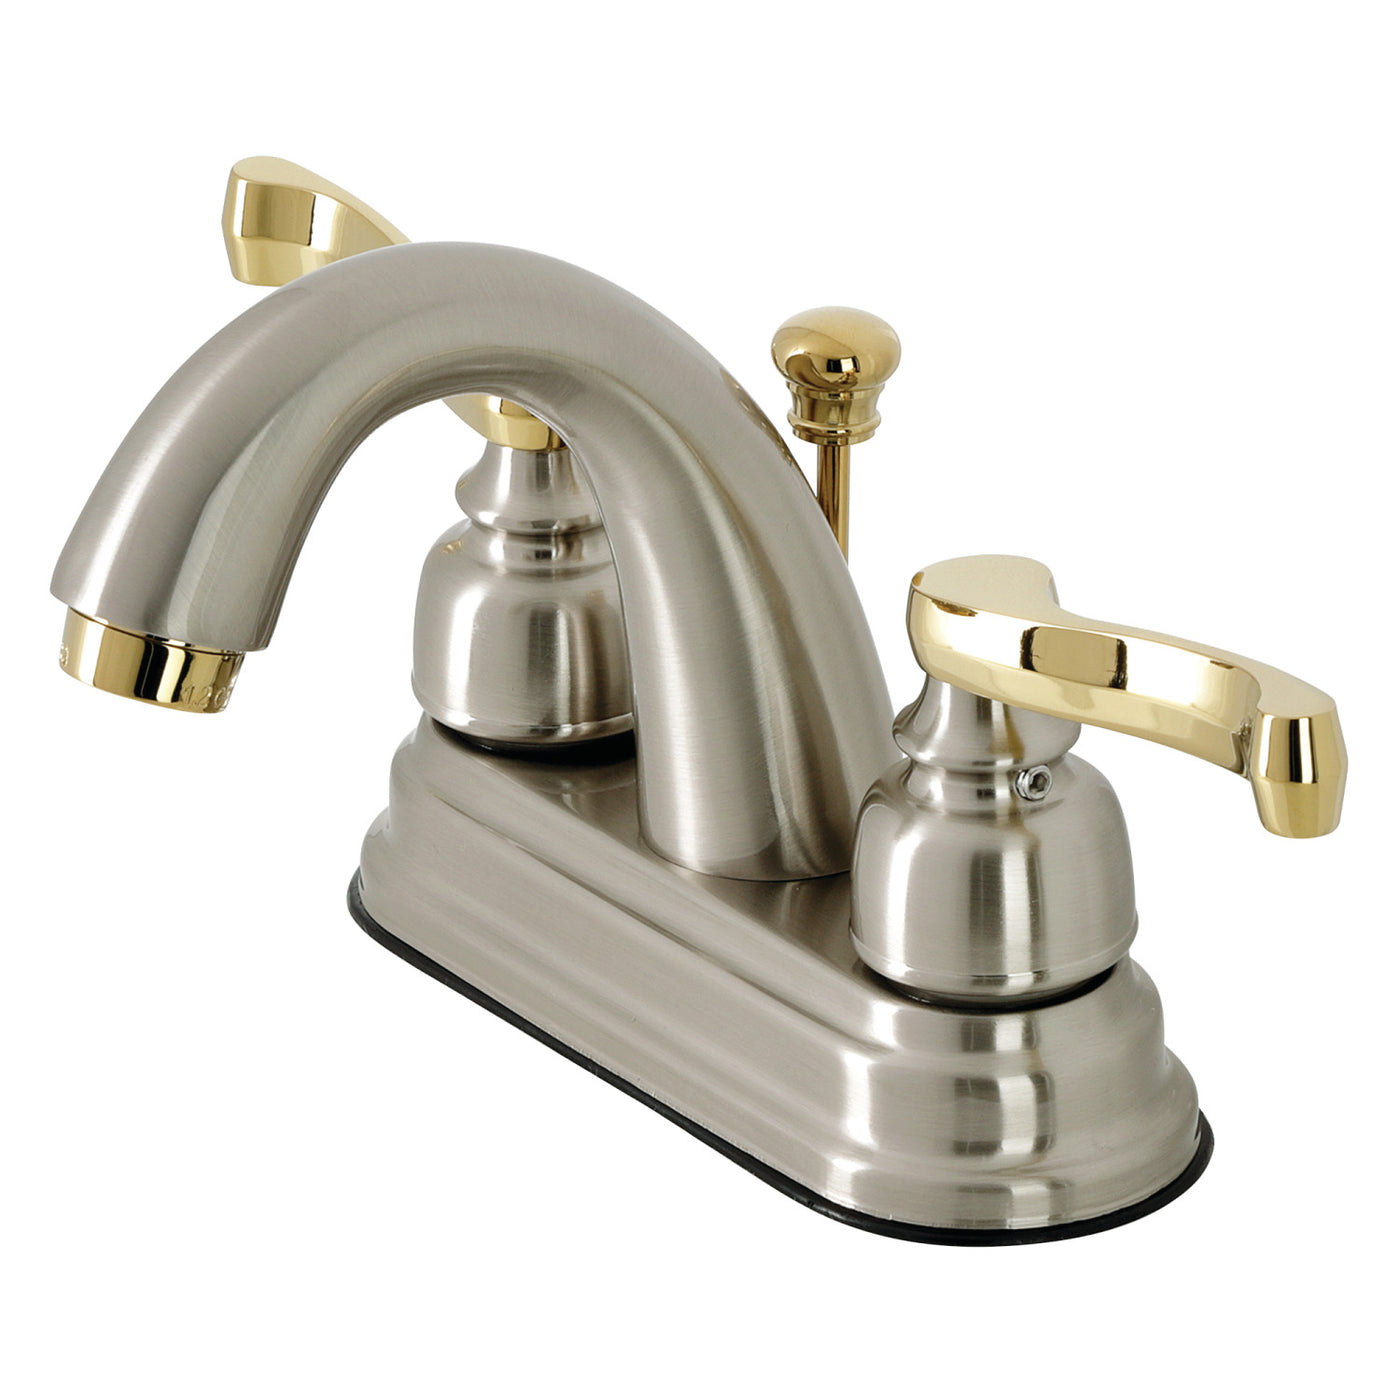 Elements of Design EB5619FL 4-Inch Centerset Bathroom Faucet with Retail Pop-Up, Brushed Nickel/Polished Brass